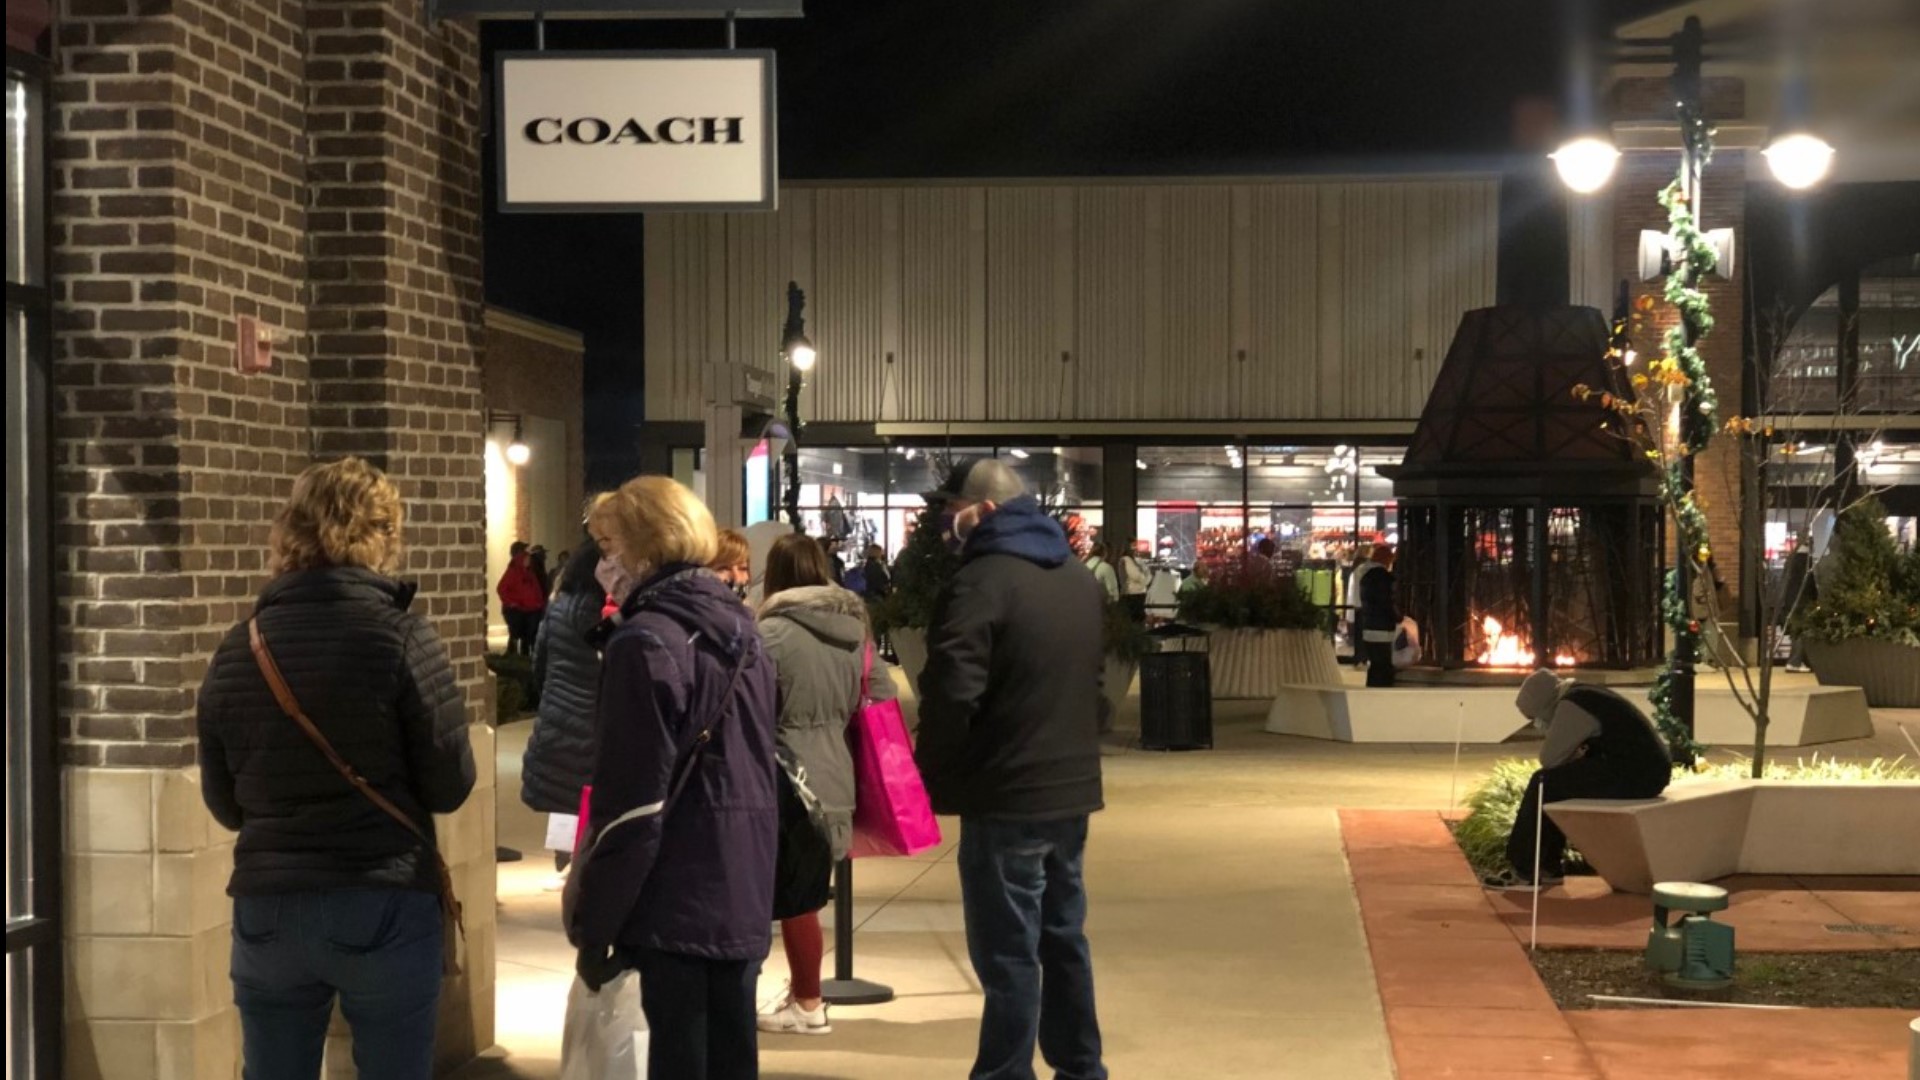 A look at some of the safety precautions Tanger Outlets is taking to allow for customers to shop in-person on Black Friday.